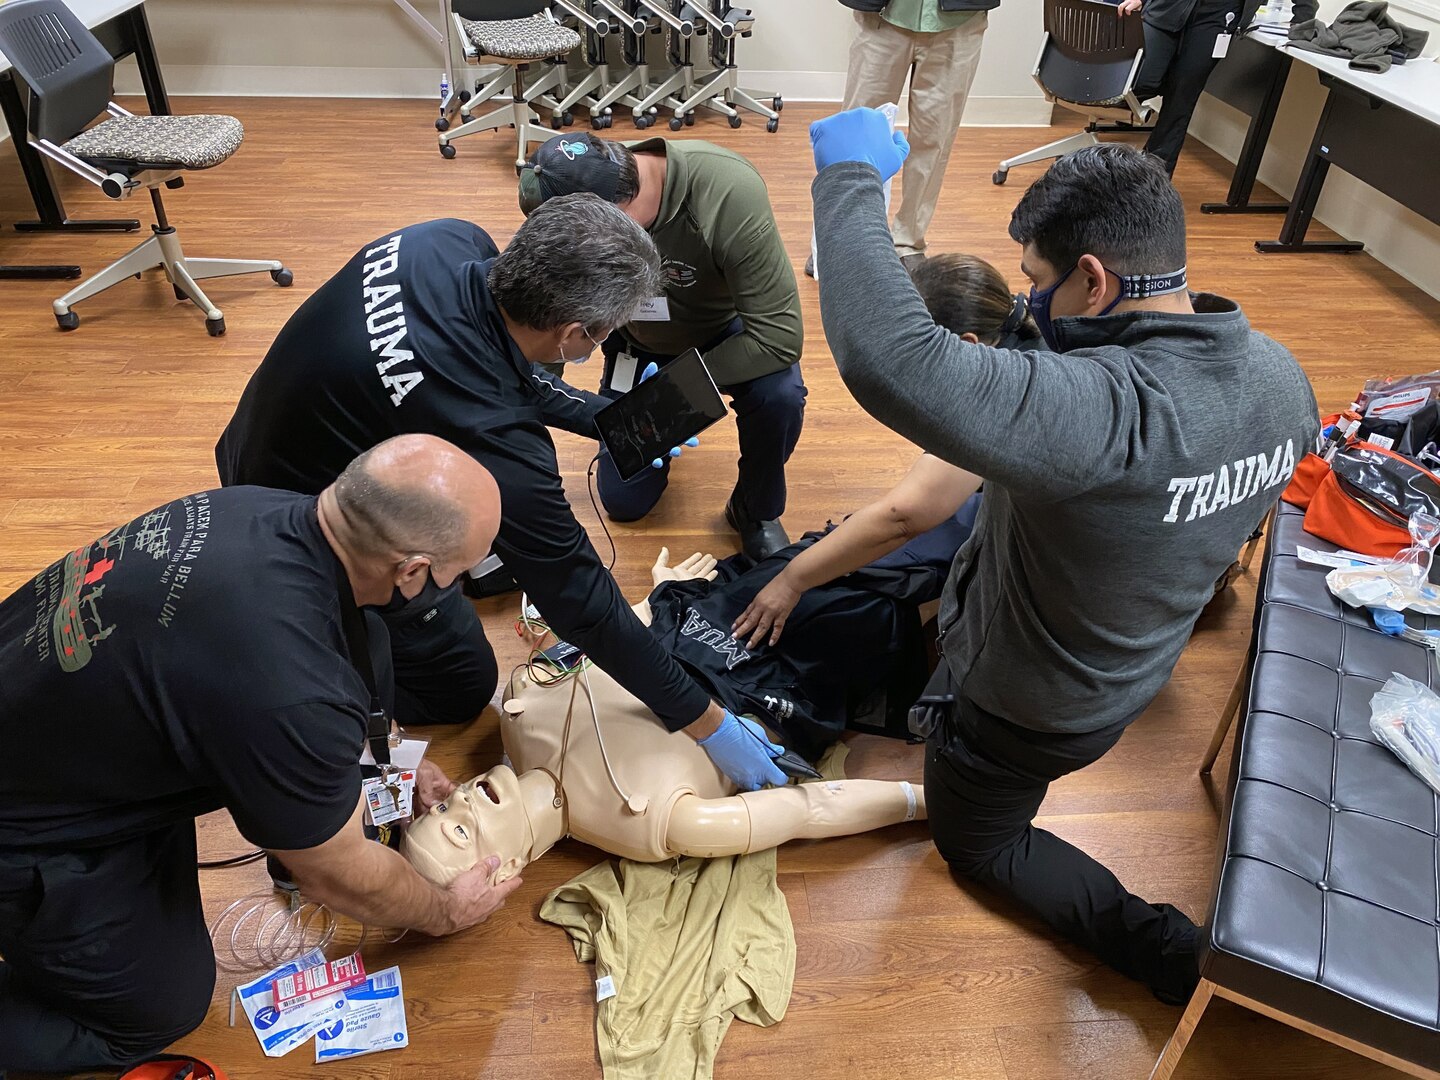 Instructors assigned to the U.S. Army Medical Center of Excellence Army Trauma Training Course, Miami, Florida, demonstrate trauma scenario training for surgical teams as part of their pre-deployment training August 2021.